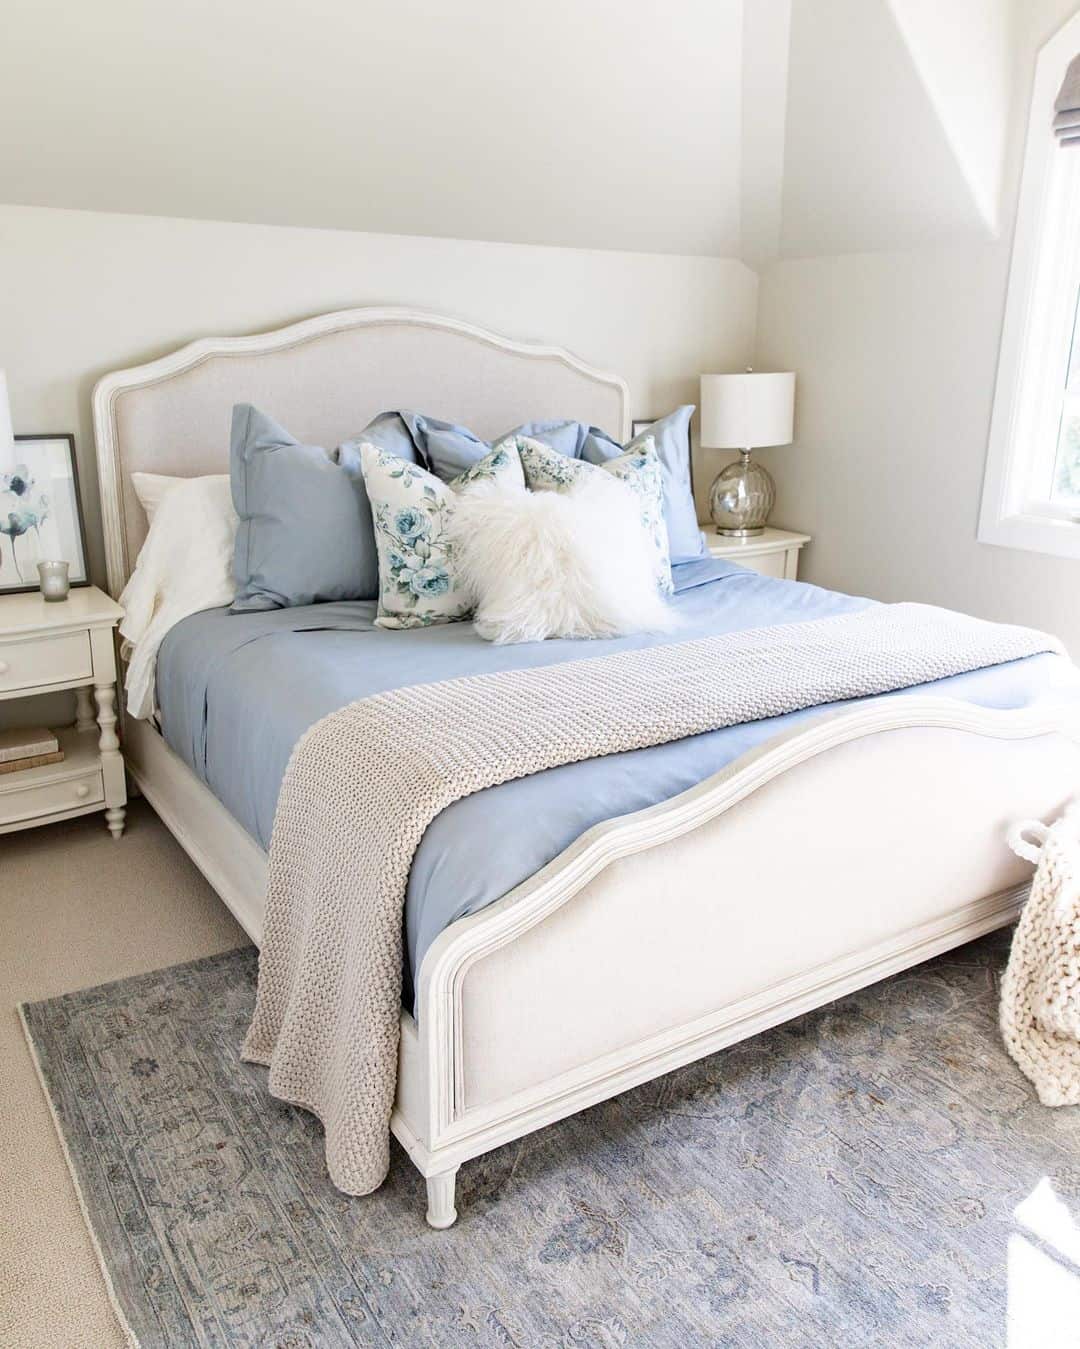 Serene Bedroom with Soft Blue Bedding Accents